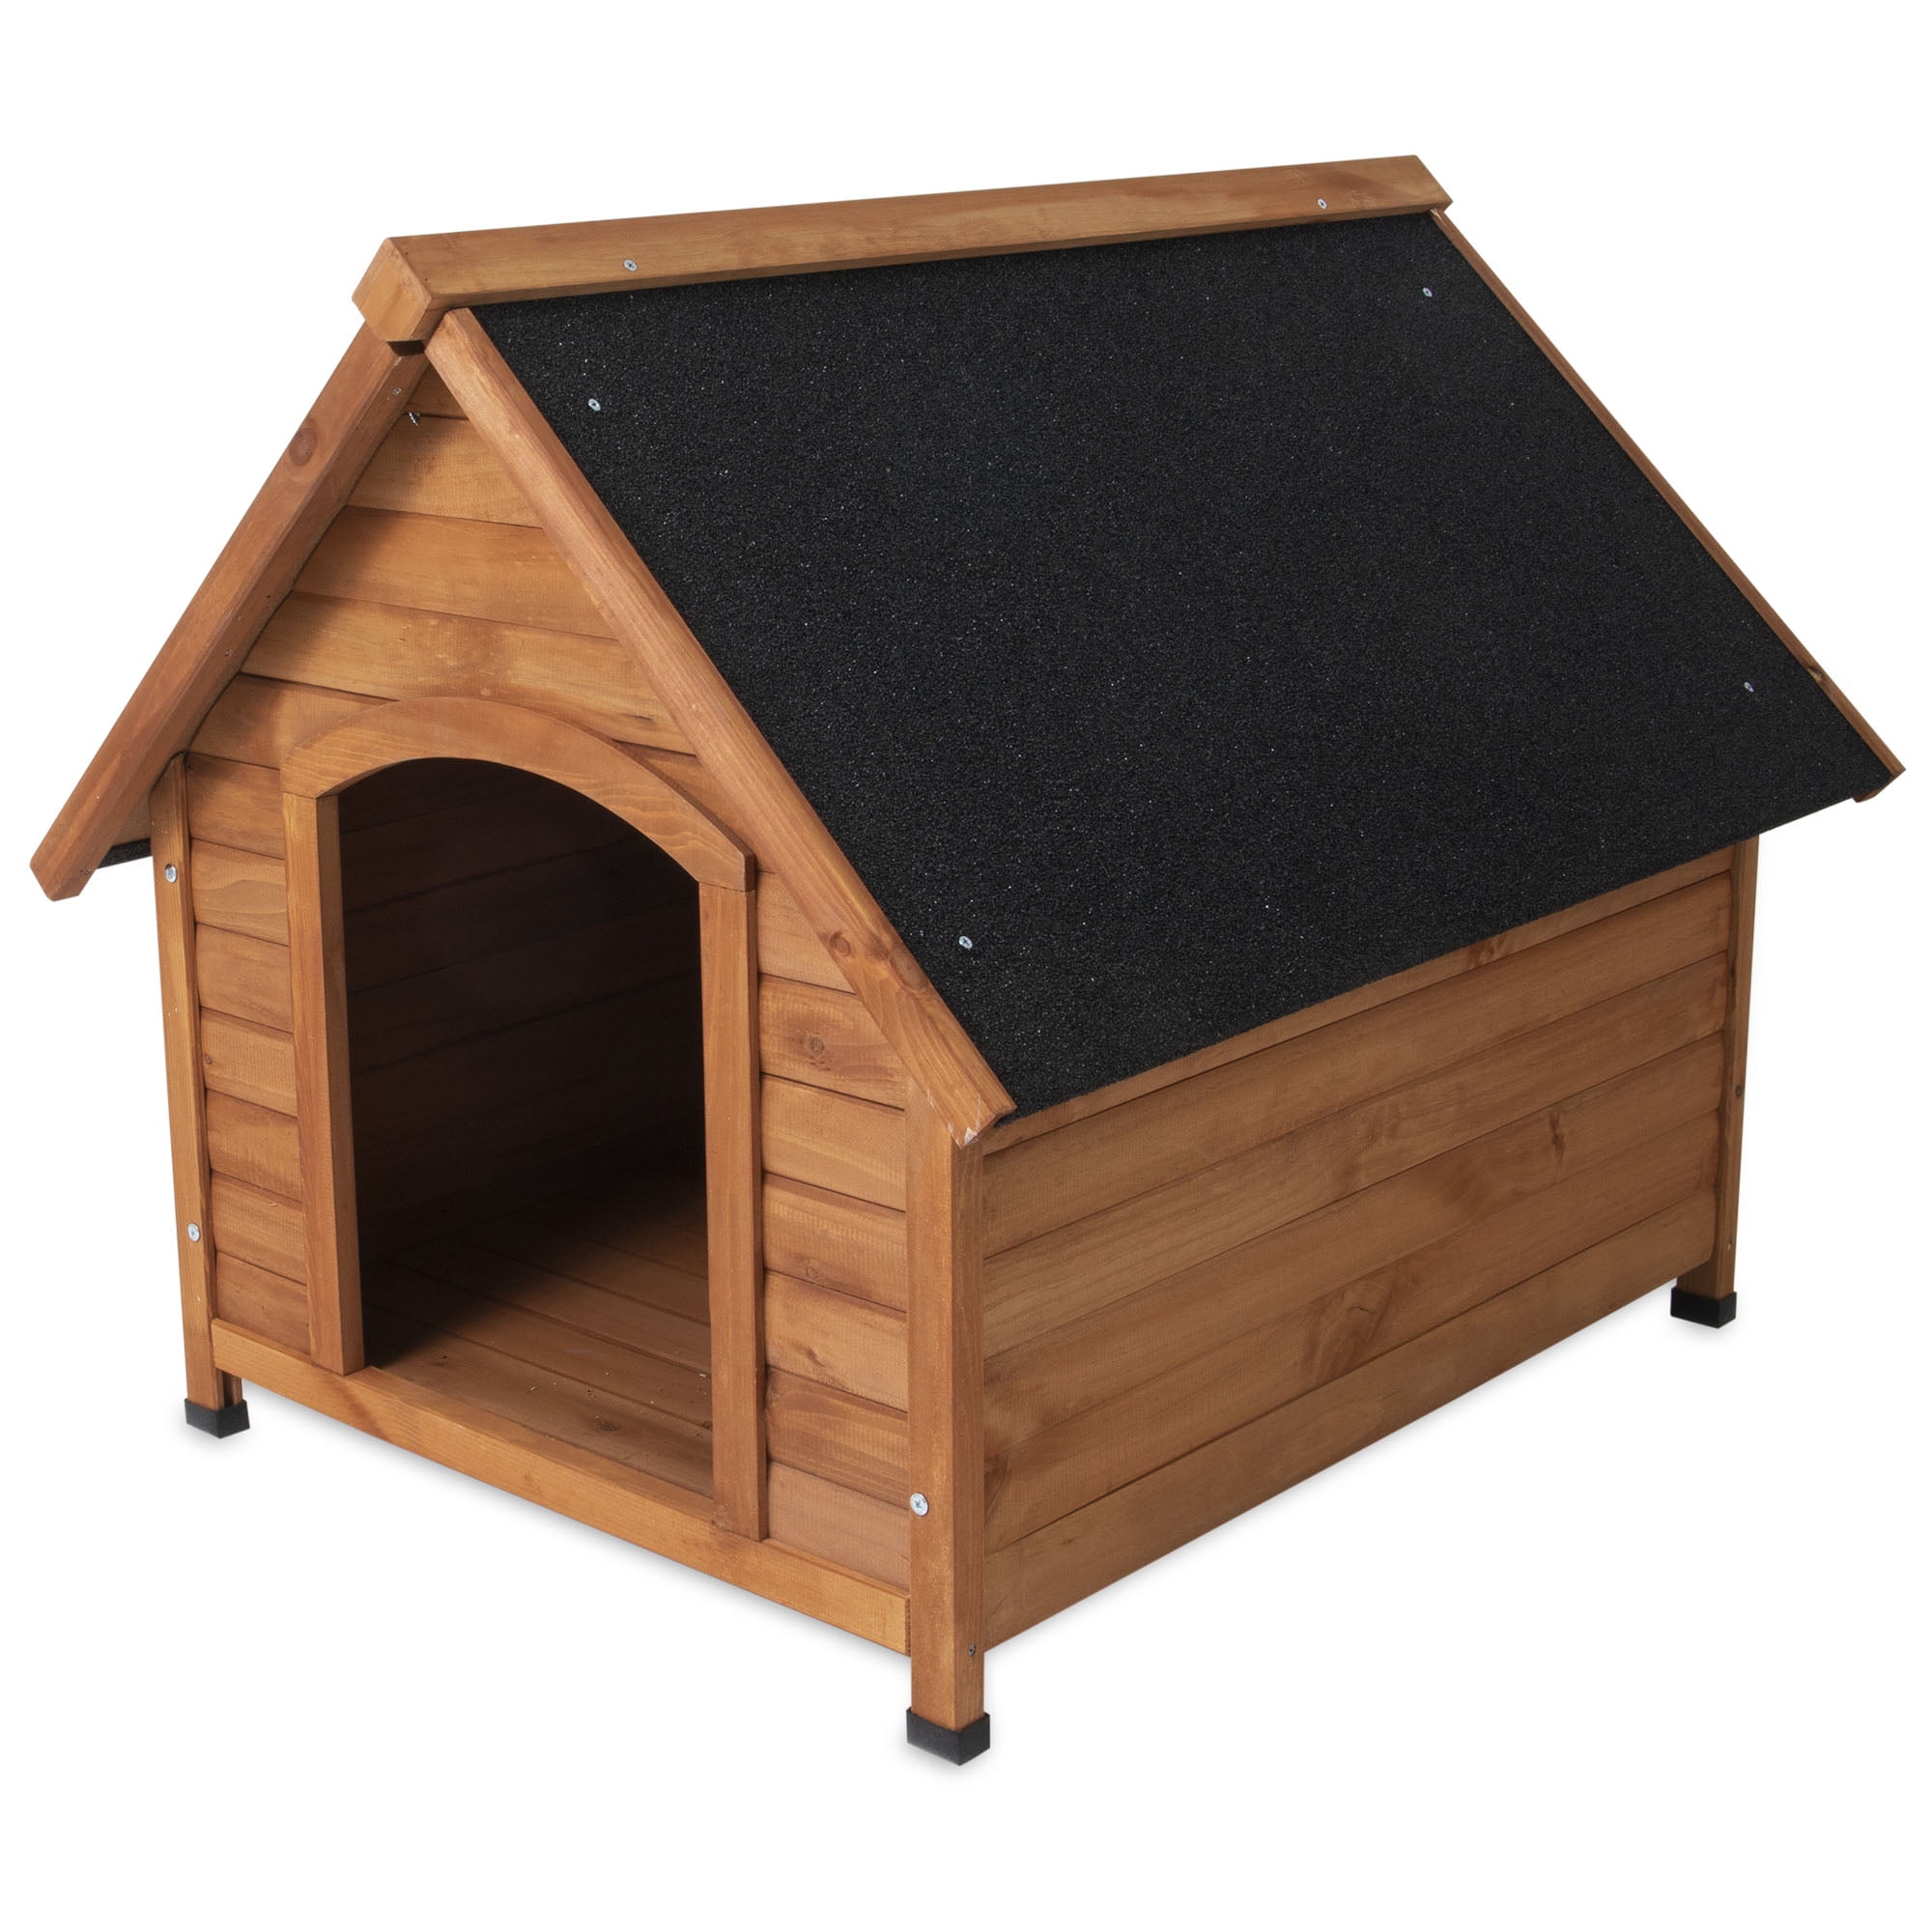 50 Large Wooden Cabin Outdoor Dog House with Porch Weatherproof Insulated Kennel Cage Pet House for Large Medium Dogs 